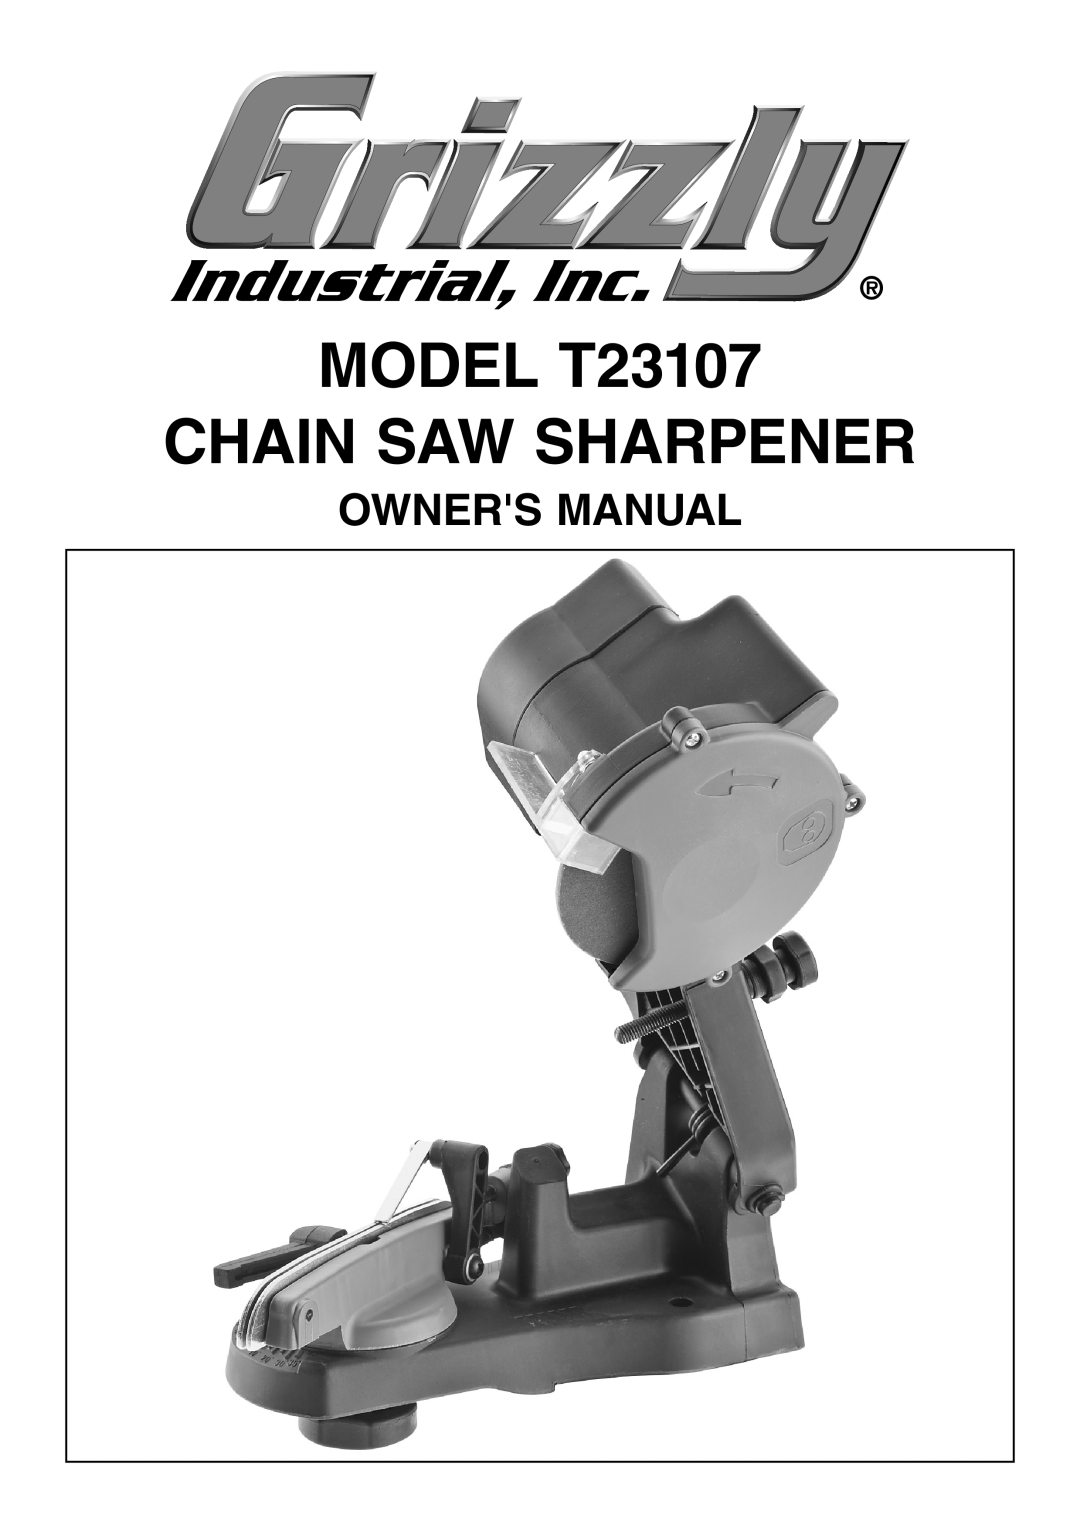 Grizzly owner manual MODEL T23107 CHAIN SAW SHARPENER 